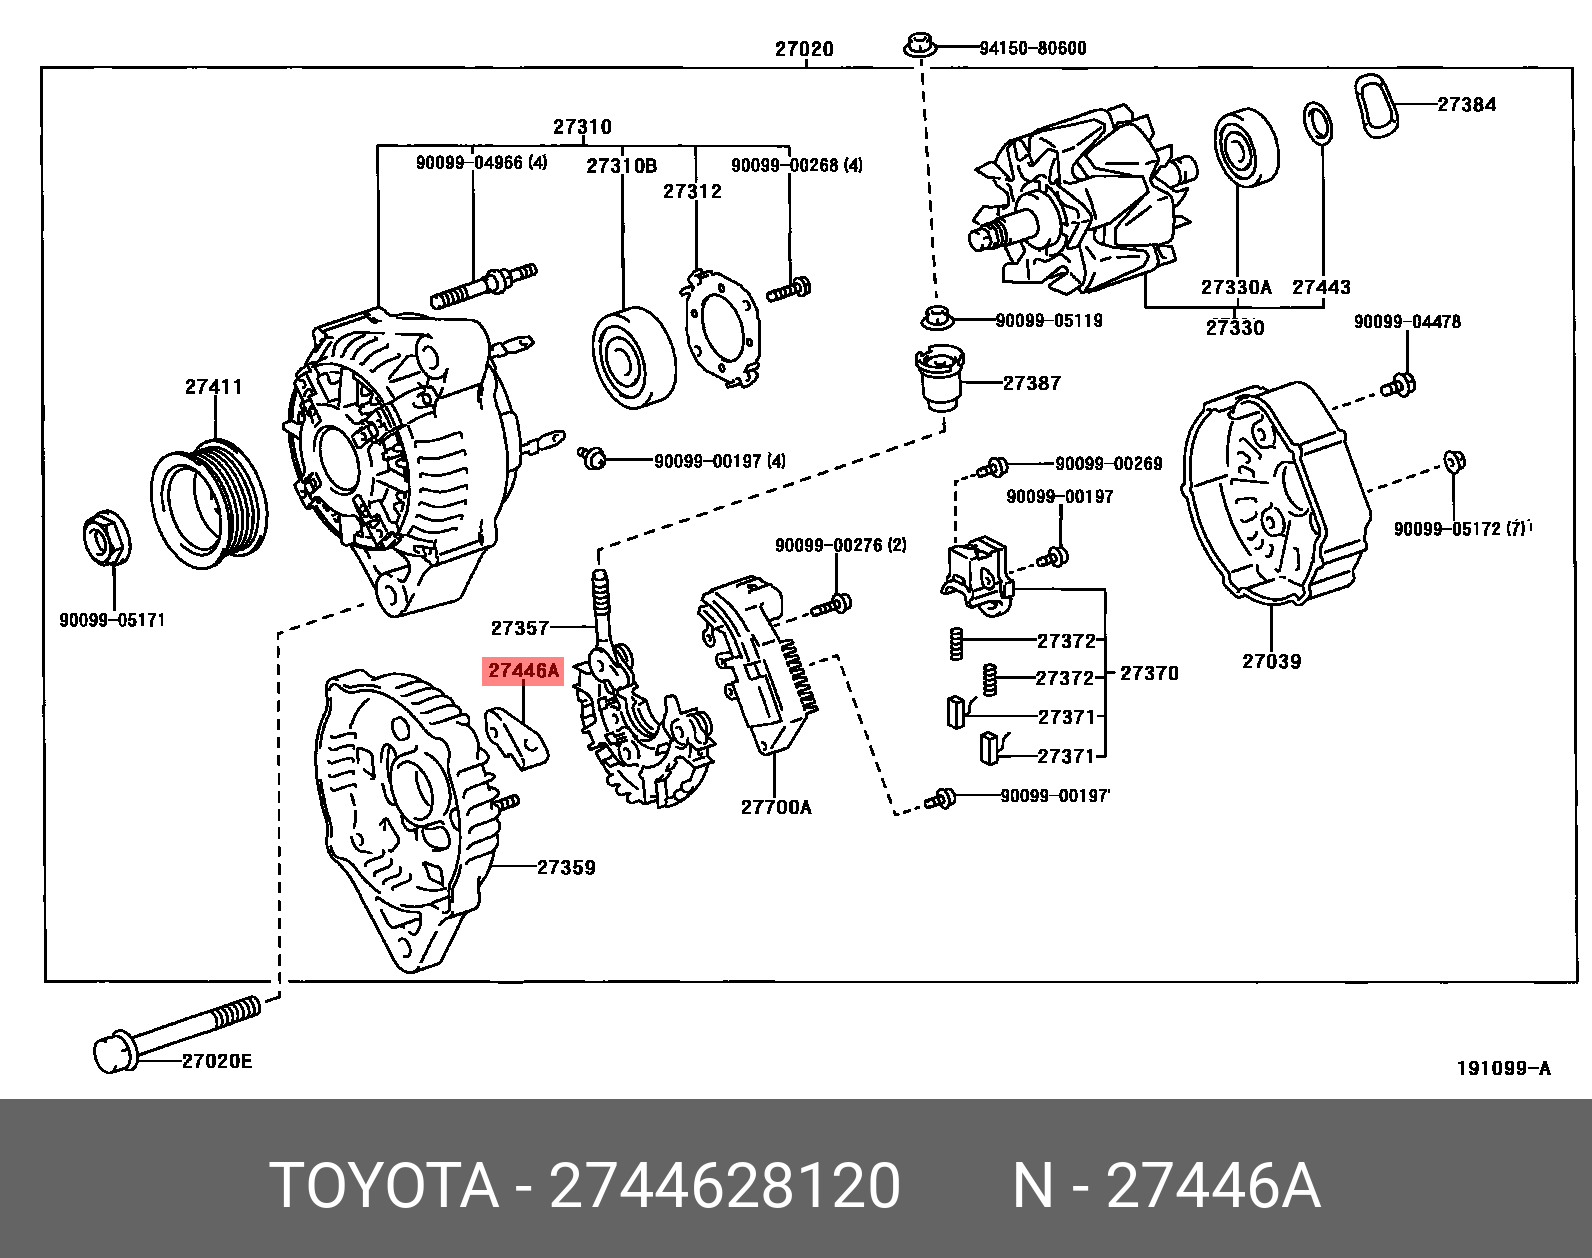 CAMRY 200601 - 201108, CLAMP